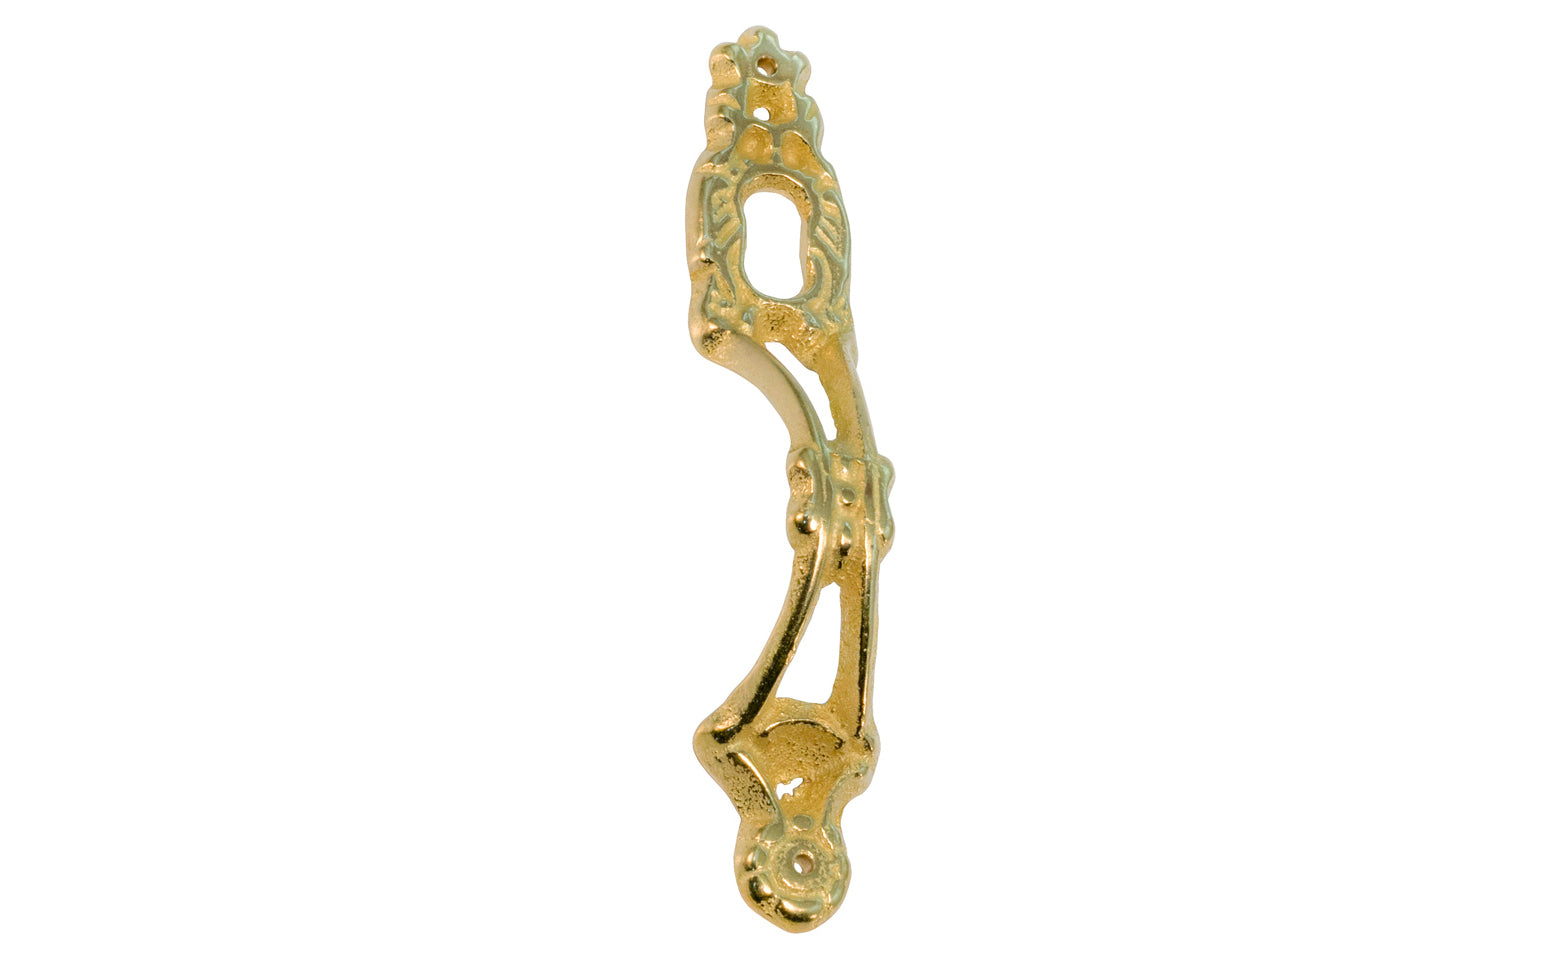 Vintage-style Hardware · Traditional & classic. An elegant & decorative keyhole cabinet pull made of solid brass material. Great for furniture, china cabinets, hutches, & cabinets. Made of solid brass material. Non-lacquered brass (will patina naturally over time).